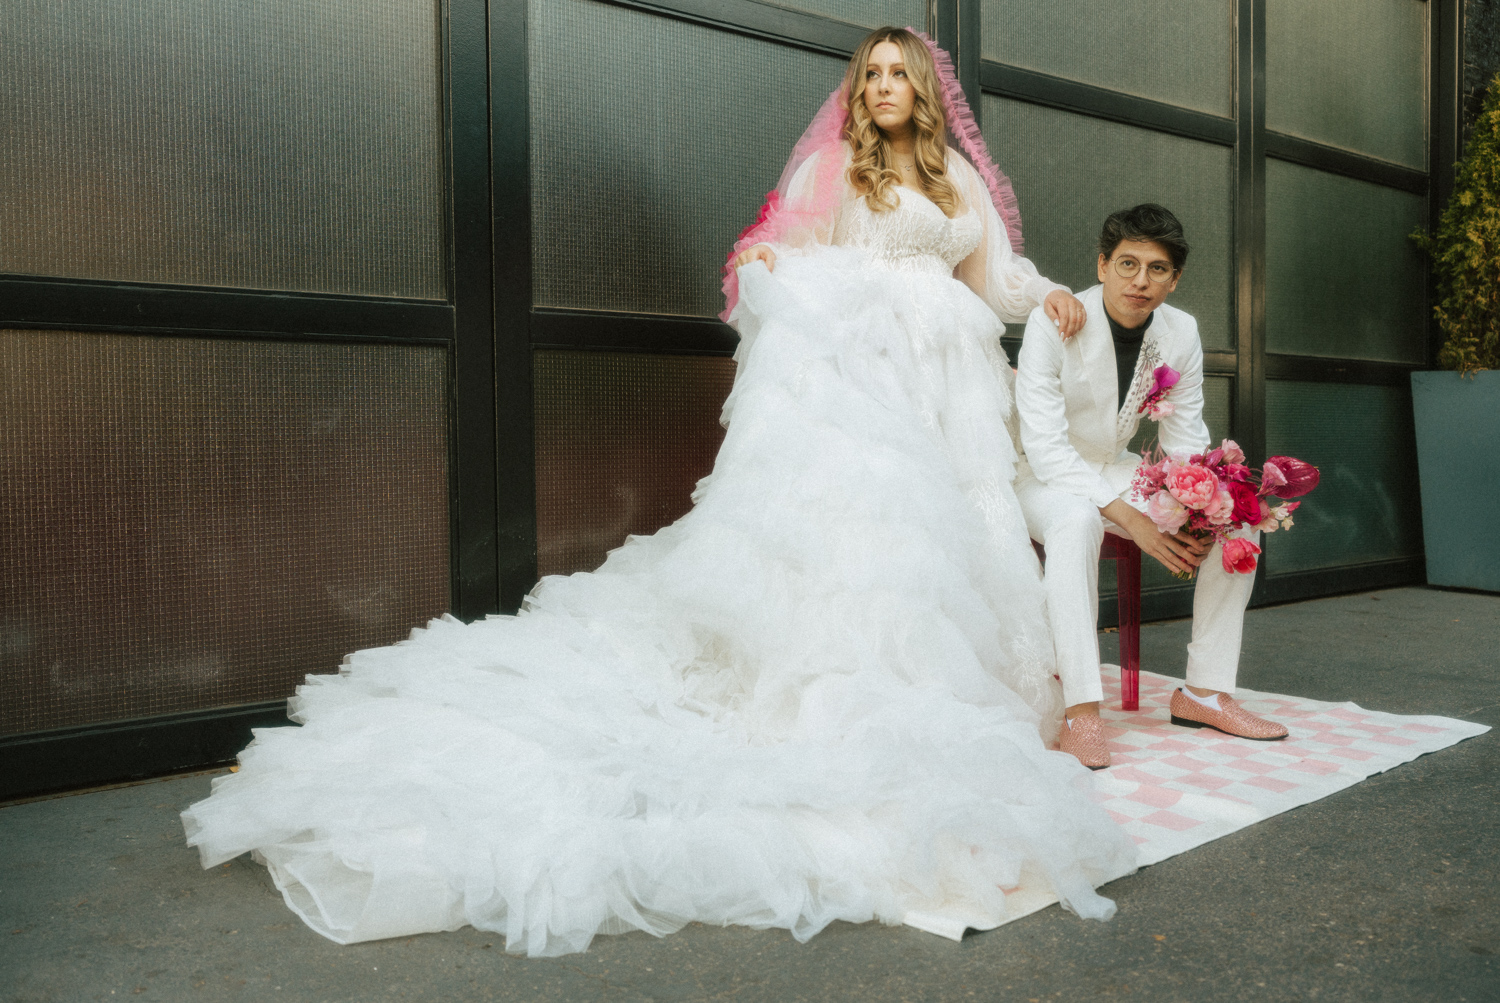 A bride poses with her husband showing off their pink disco wedding details in an editorial wedding portrait.